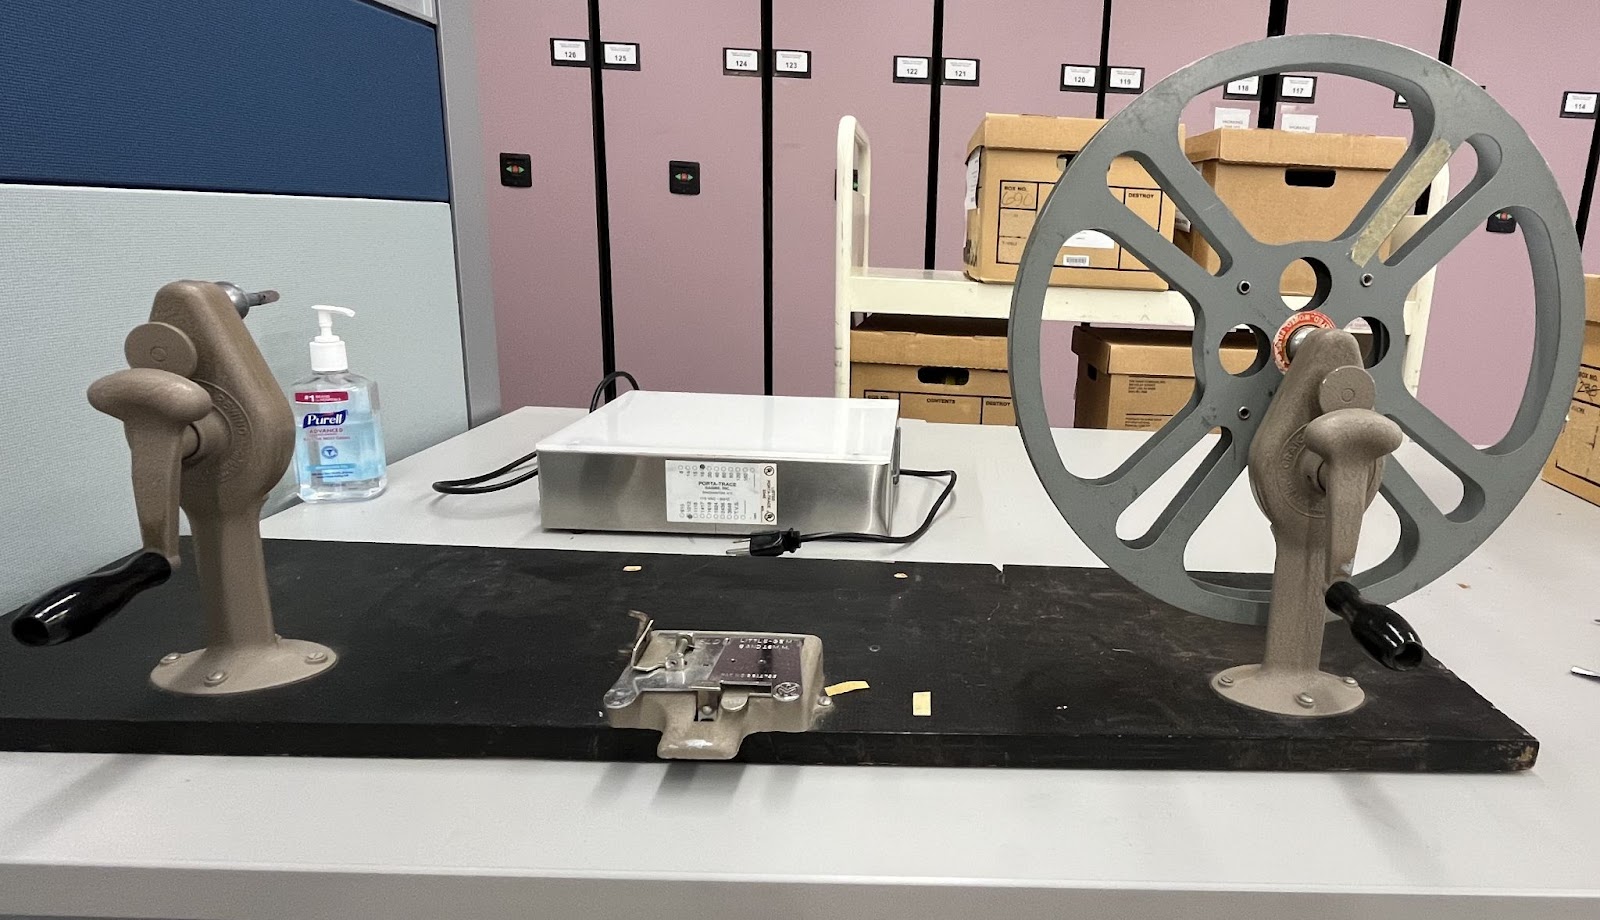 Film rewinder and lightbox on a table